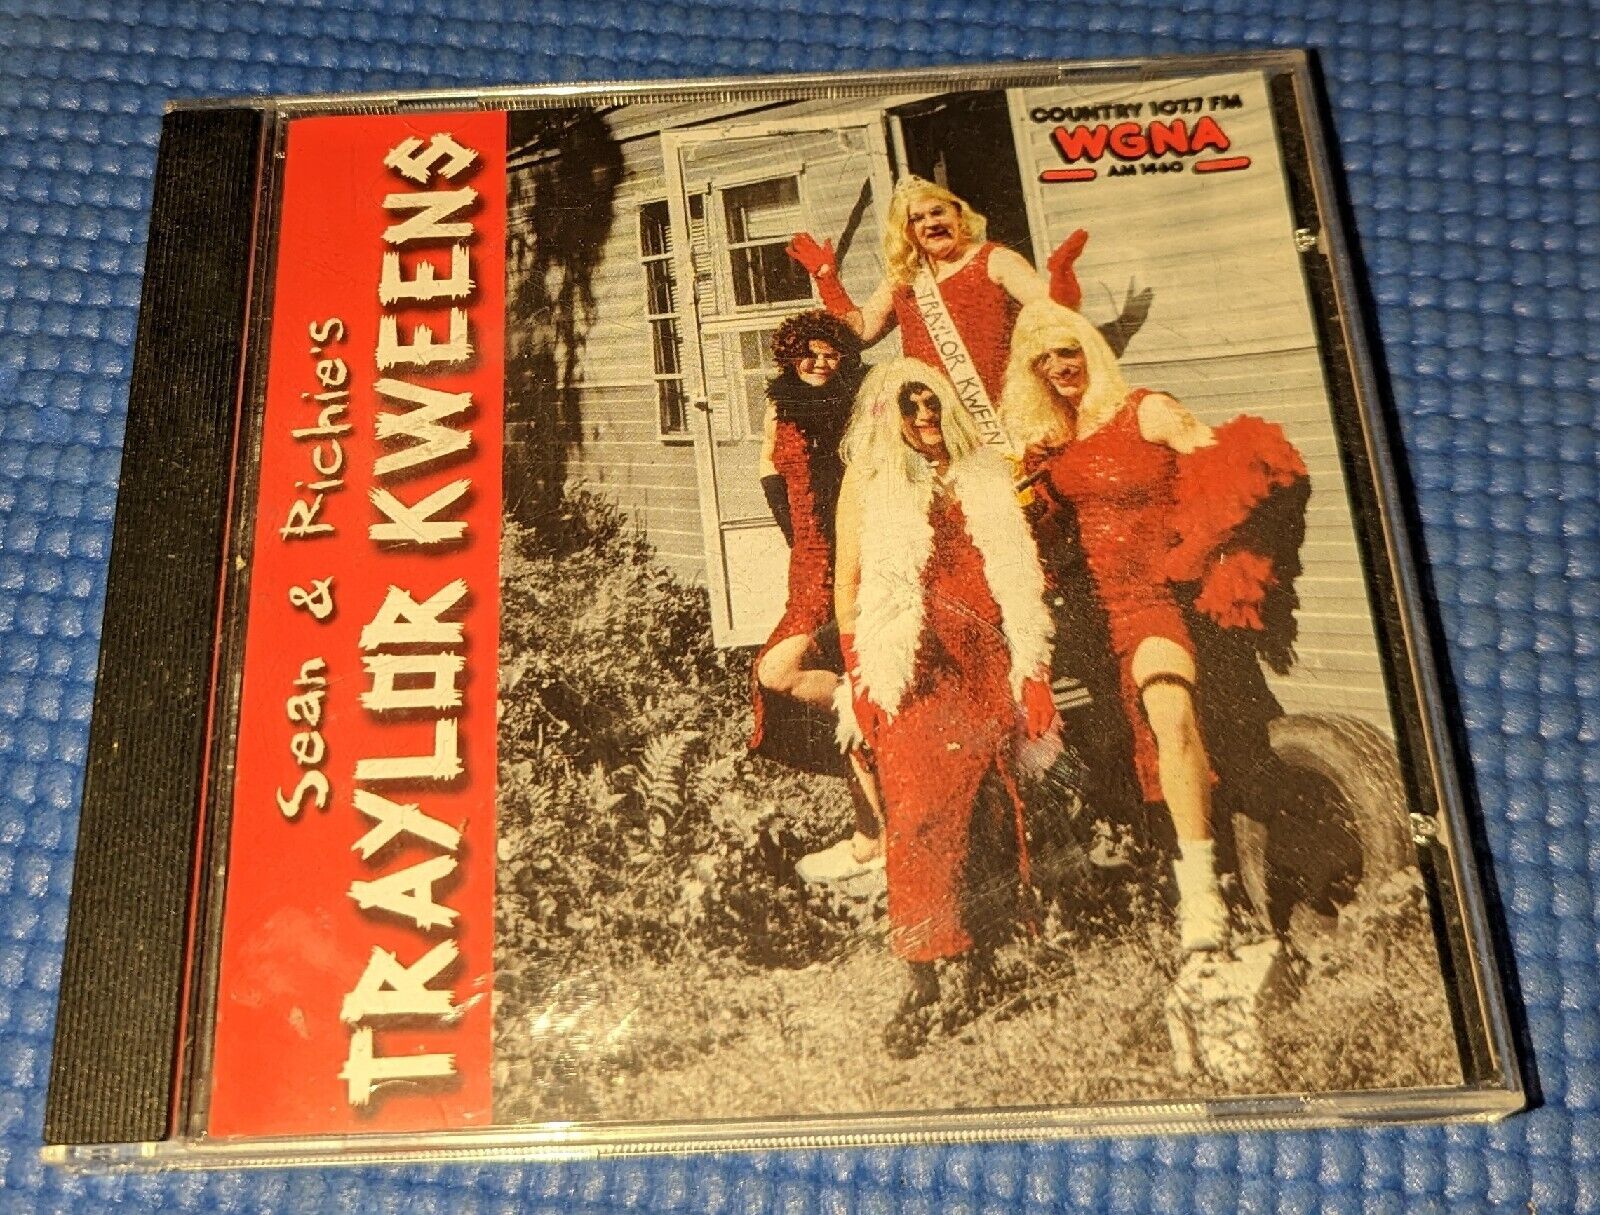 Rare vintage Sean & Richie\'s Country CD Traylor Kweens 107.7 WGNA Drag Queens